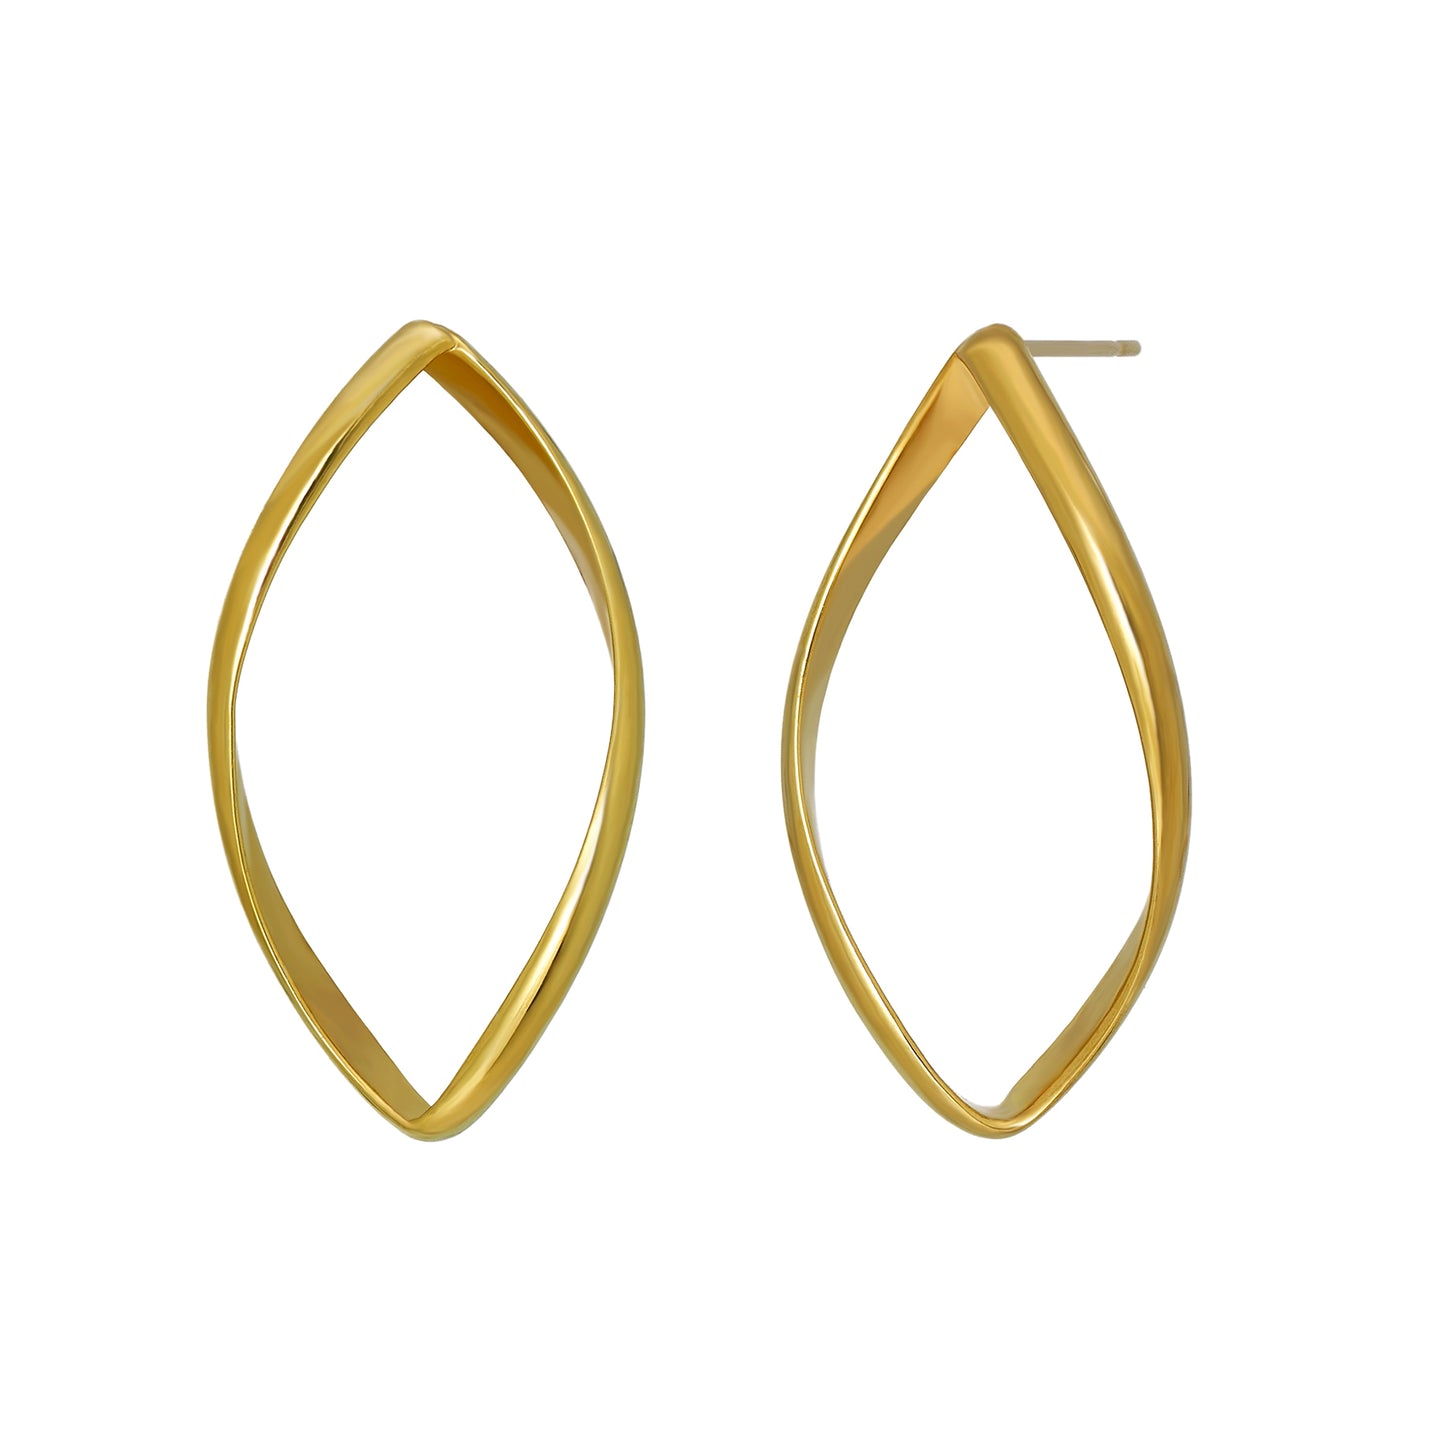 925 Sterling Silver Earrings "Marquise" (Yellow Gold Plated) - Product Image